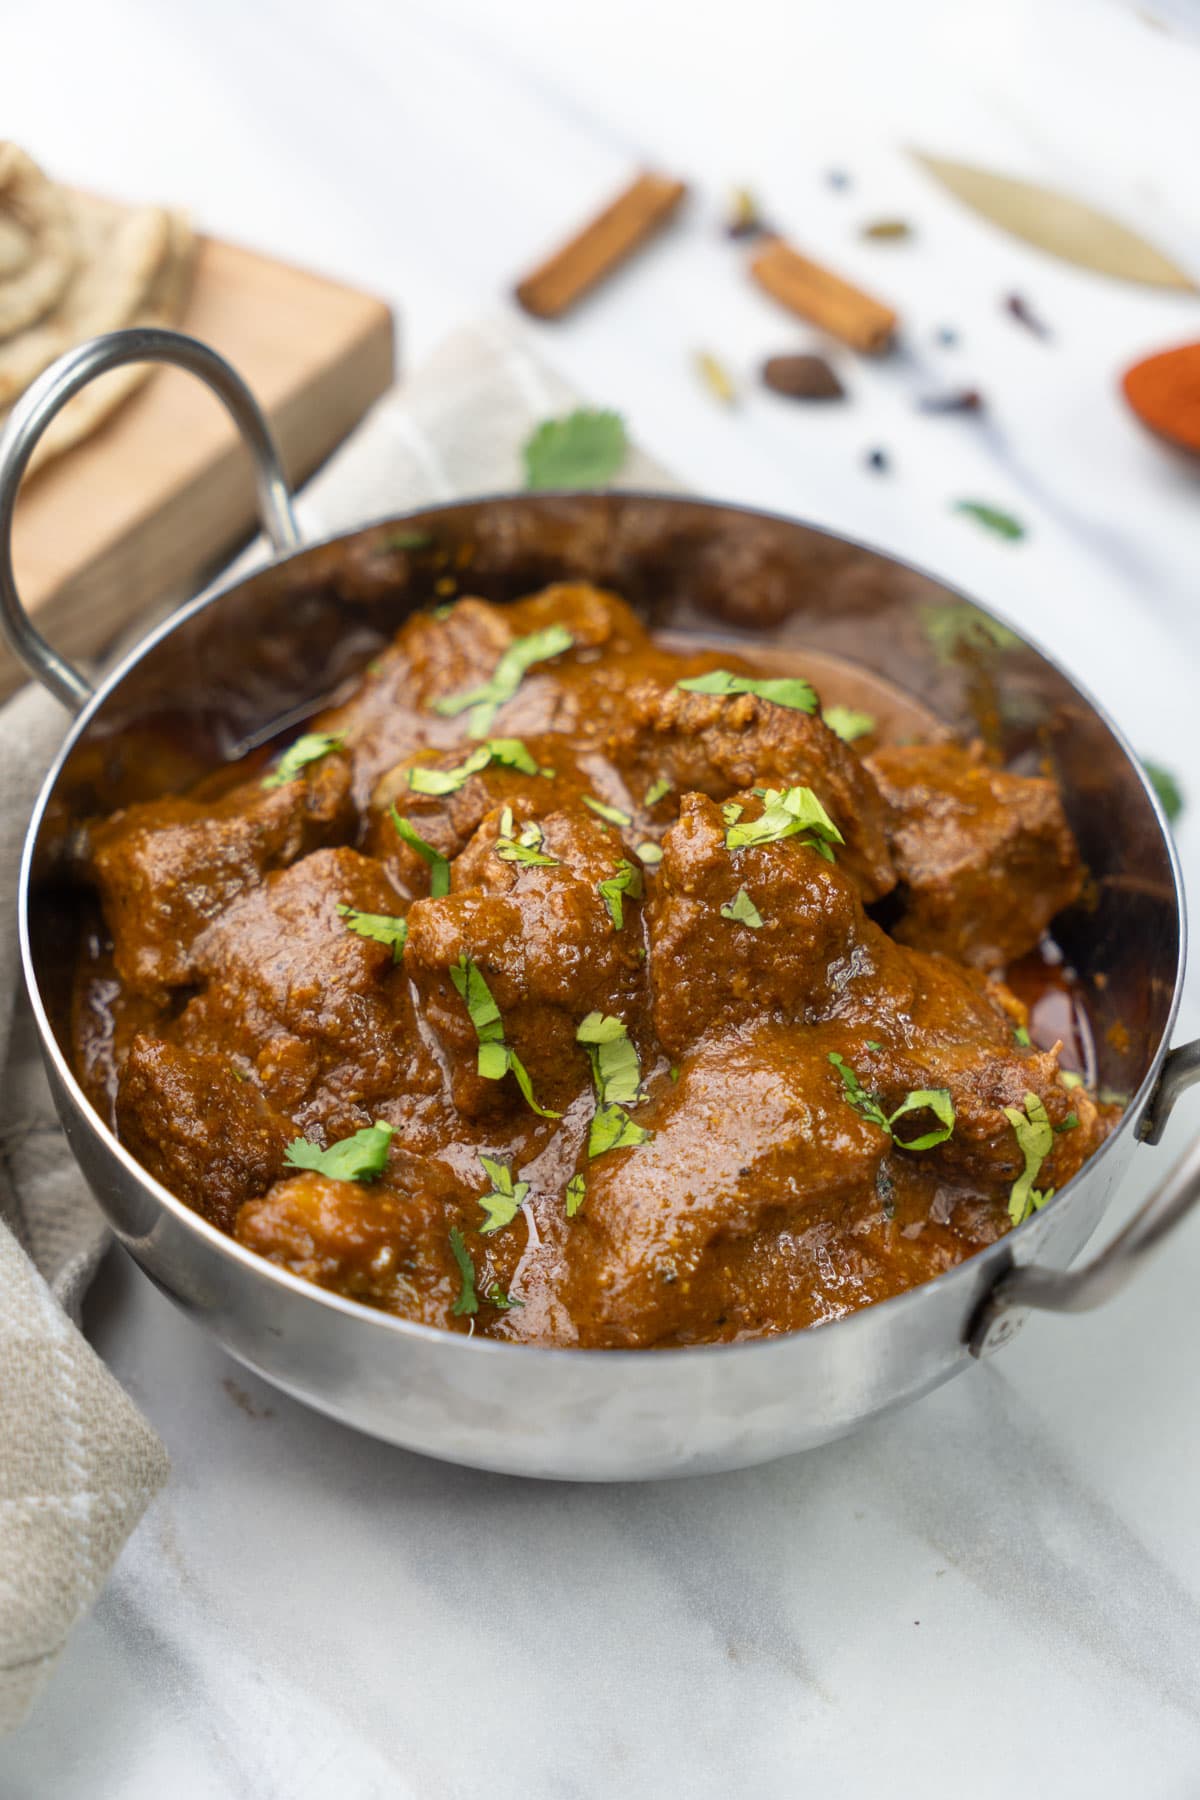 rogan josh ready to serve in a stainless pot